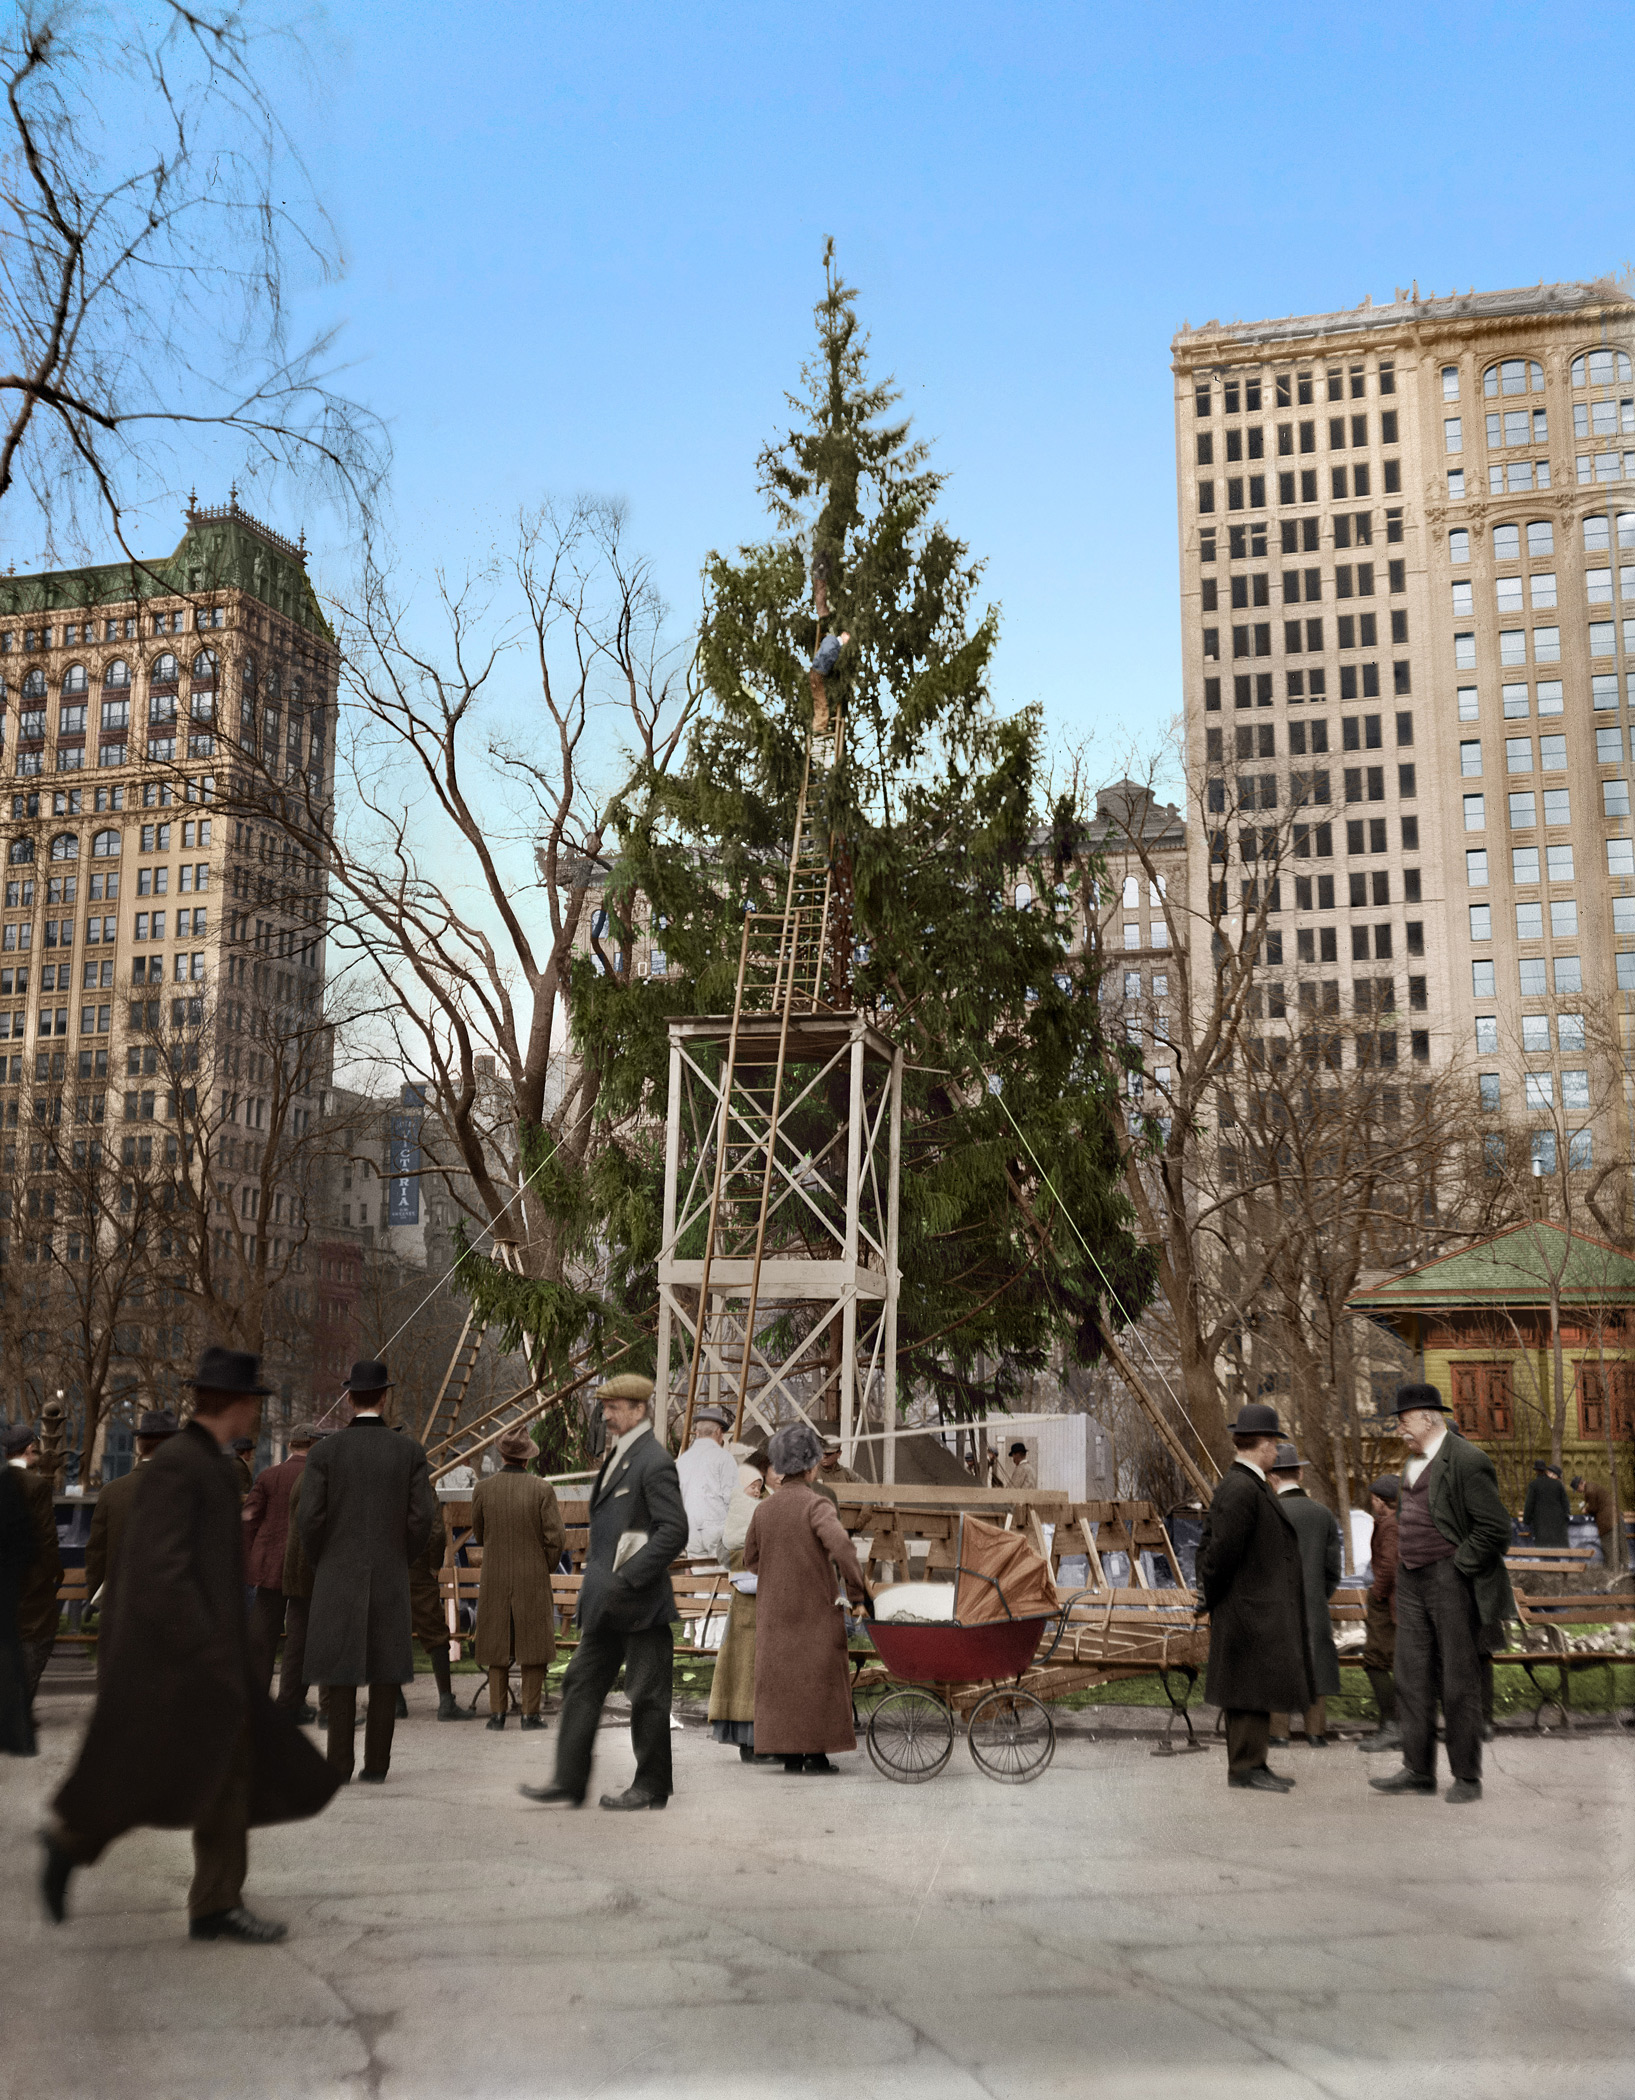 Christmas tree in Madison Square Park. New York, ca. 1910.